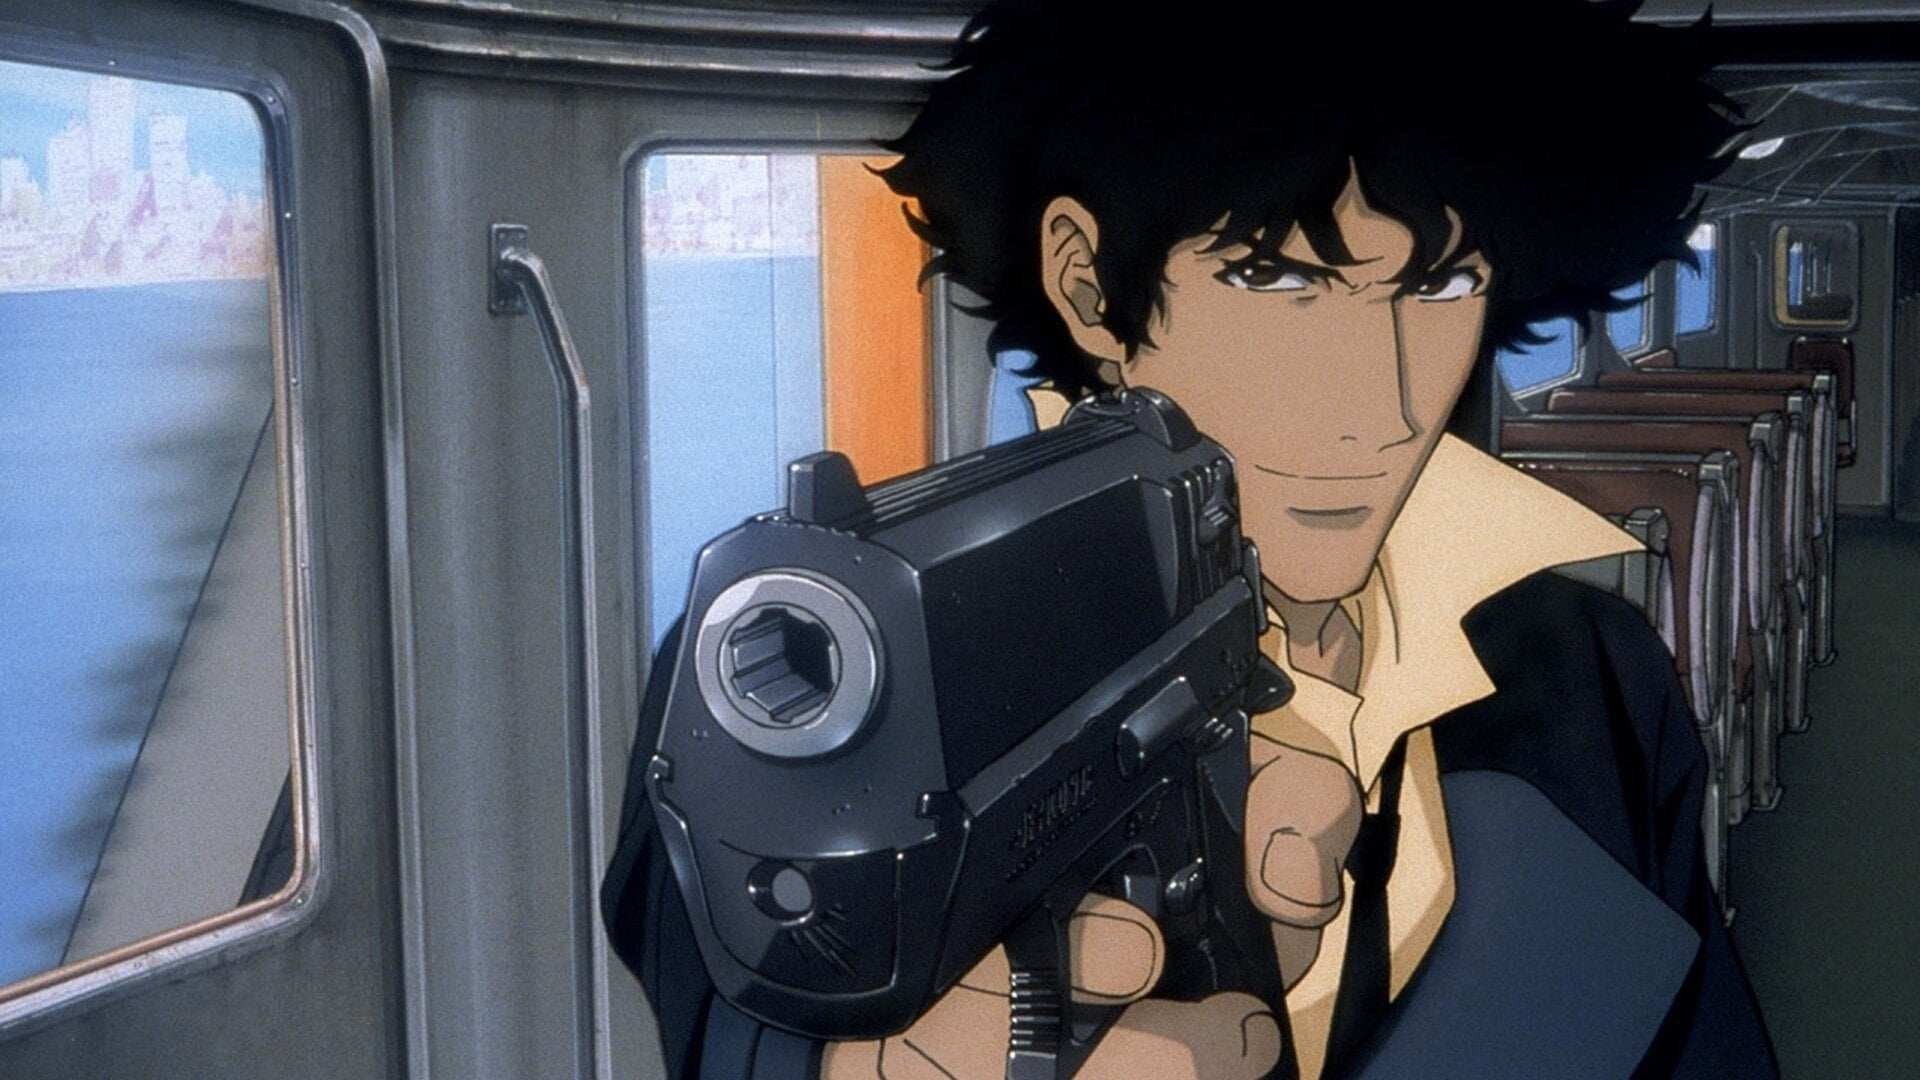 A still from the Cowboy Bebop film Knockin’ on Heaven’s Door, featuring Spike, the show’s central protagonist.